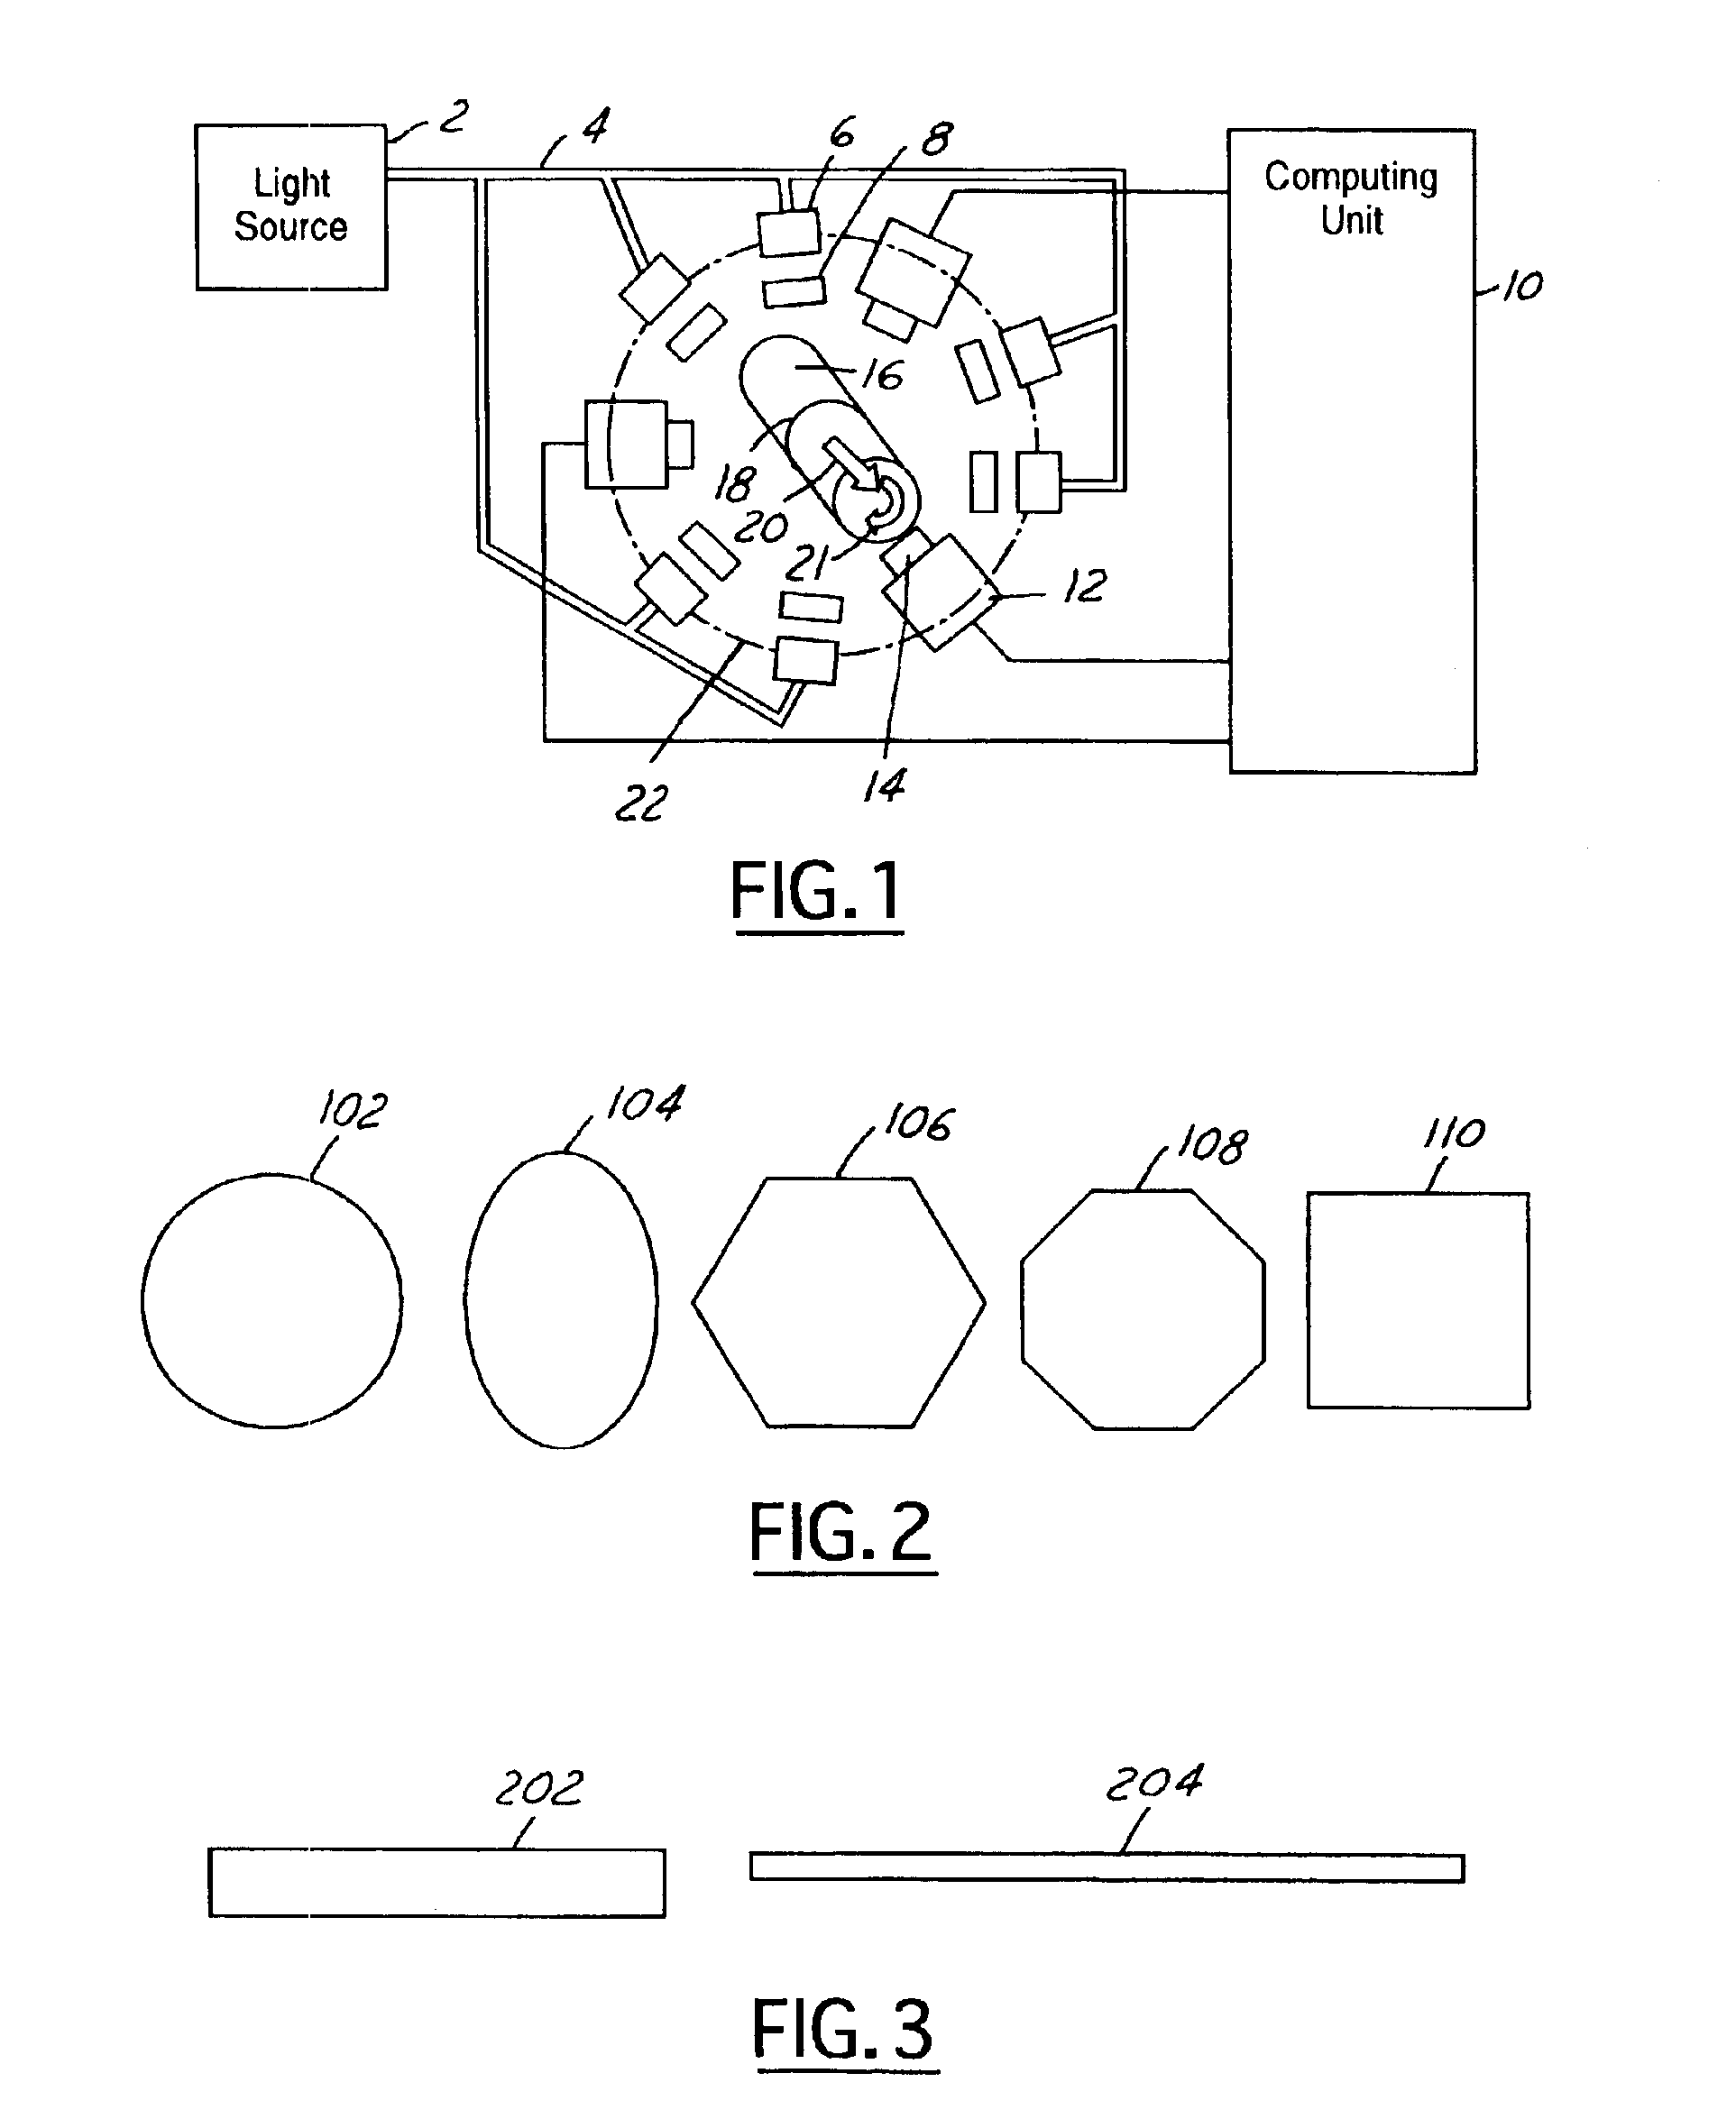 Apparatus and method for detecting surface defects on a workpiece such as a rolled/drawn metal bar